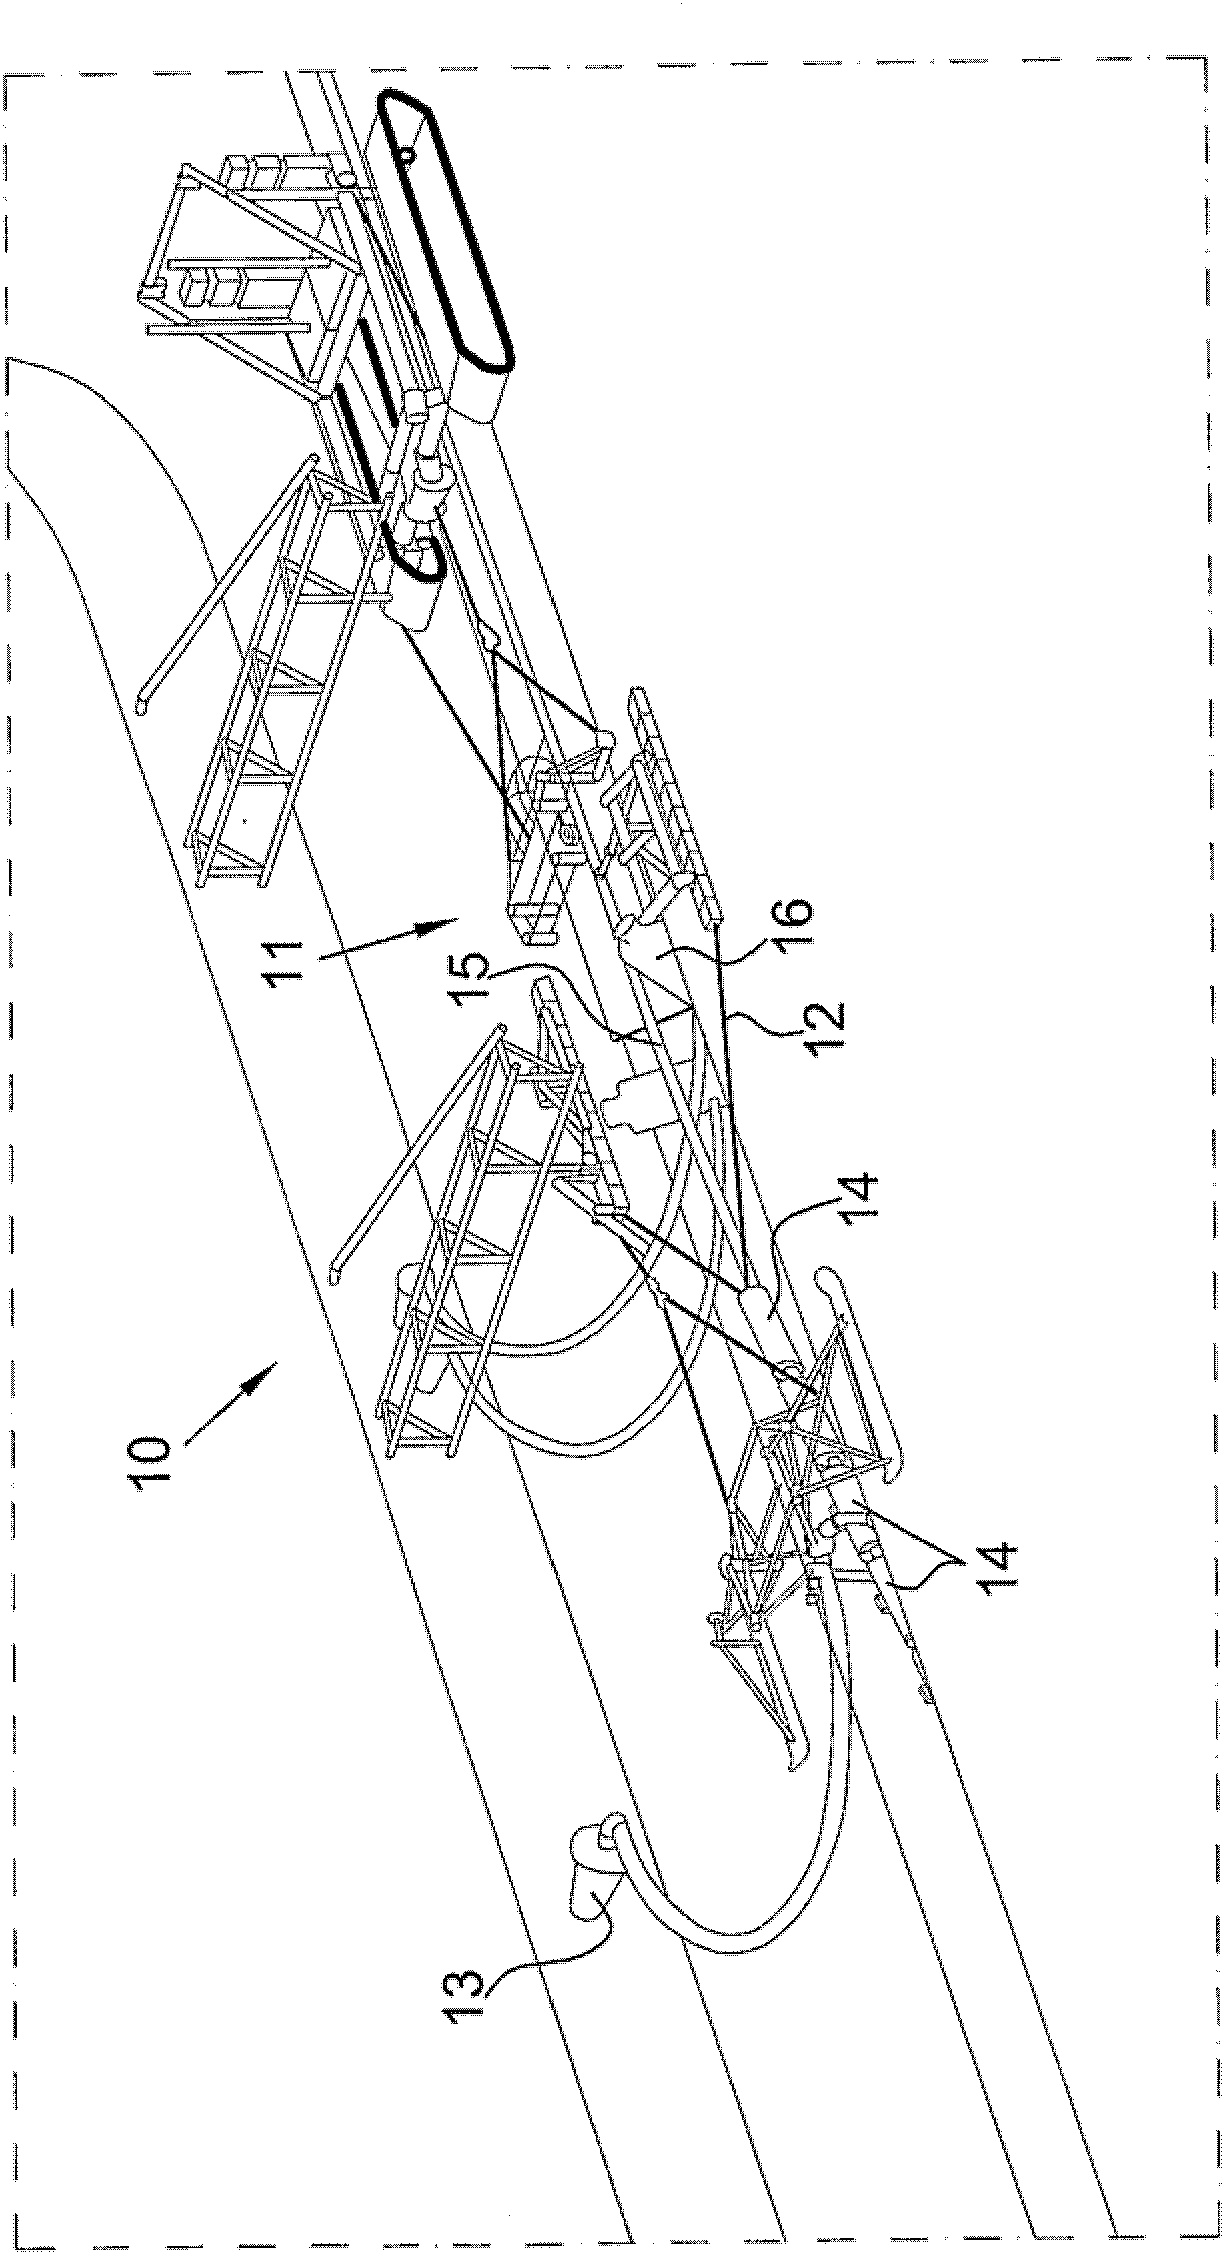 Group and method for laying and burying pipelines at the seafloor